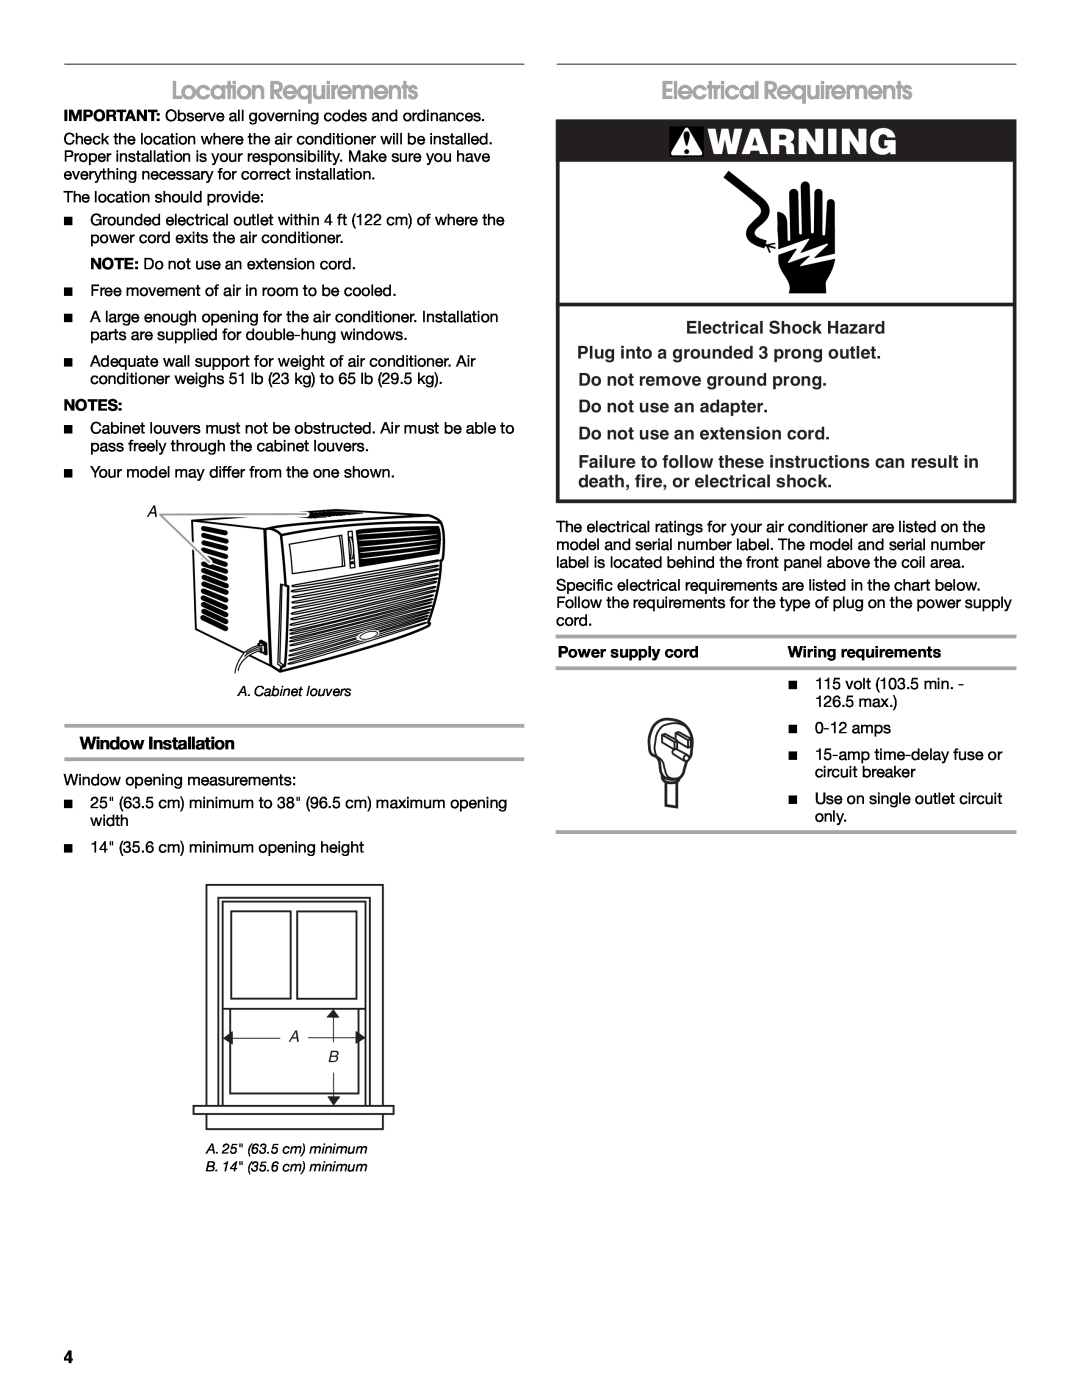 Whirlpool ACM052PS0 manual Location Requirements, Electrical Requirements, Window Installation, Electrical Shock Hazard 